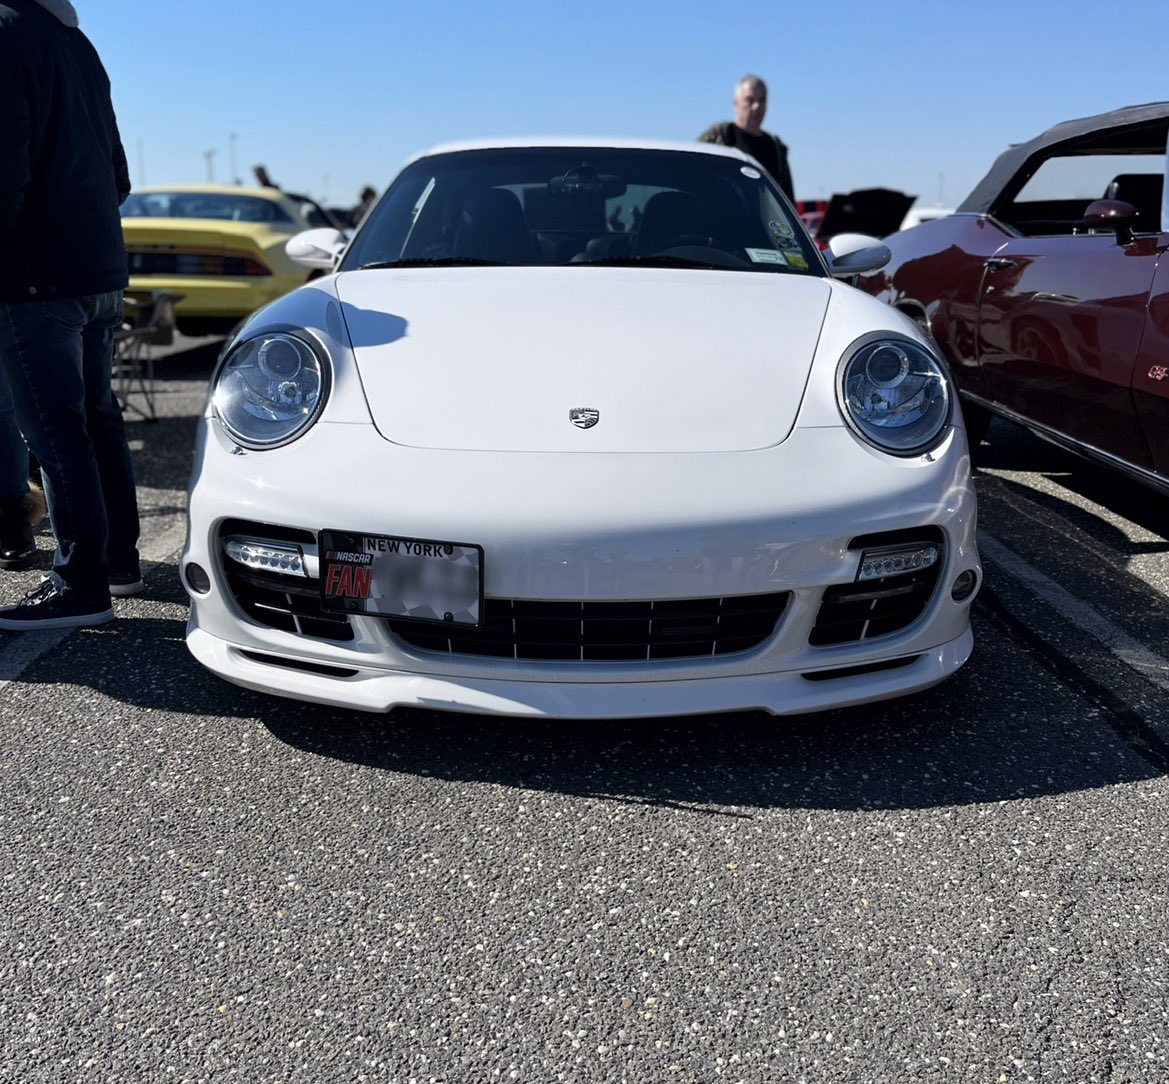 For the full post click here: instagram.com/p/CqDcRQpOOPP/

This unbelievable example shown here is a 2009 Porsche 911 Turbo finished in ‘Carrara White’ over a black full leather interior, and it’s heavily modified with all of the right options!

AMMEDIANY.com

#911turbo